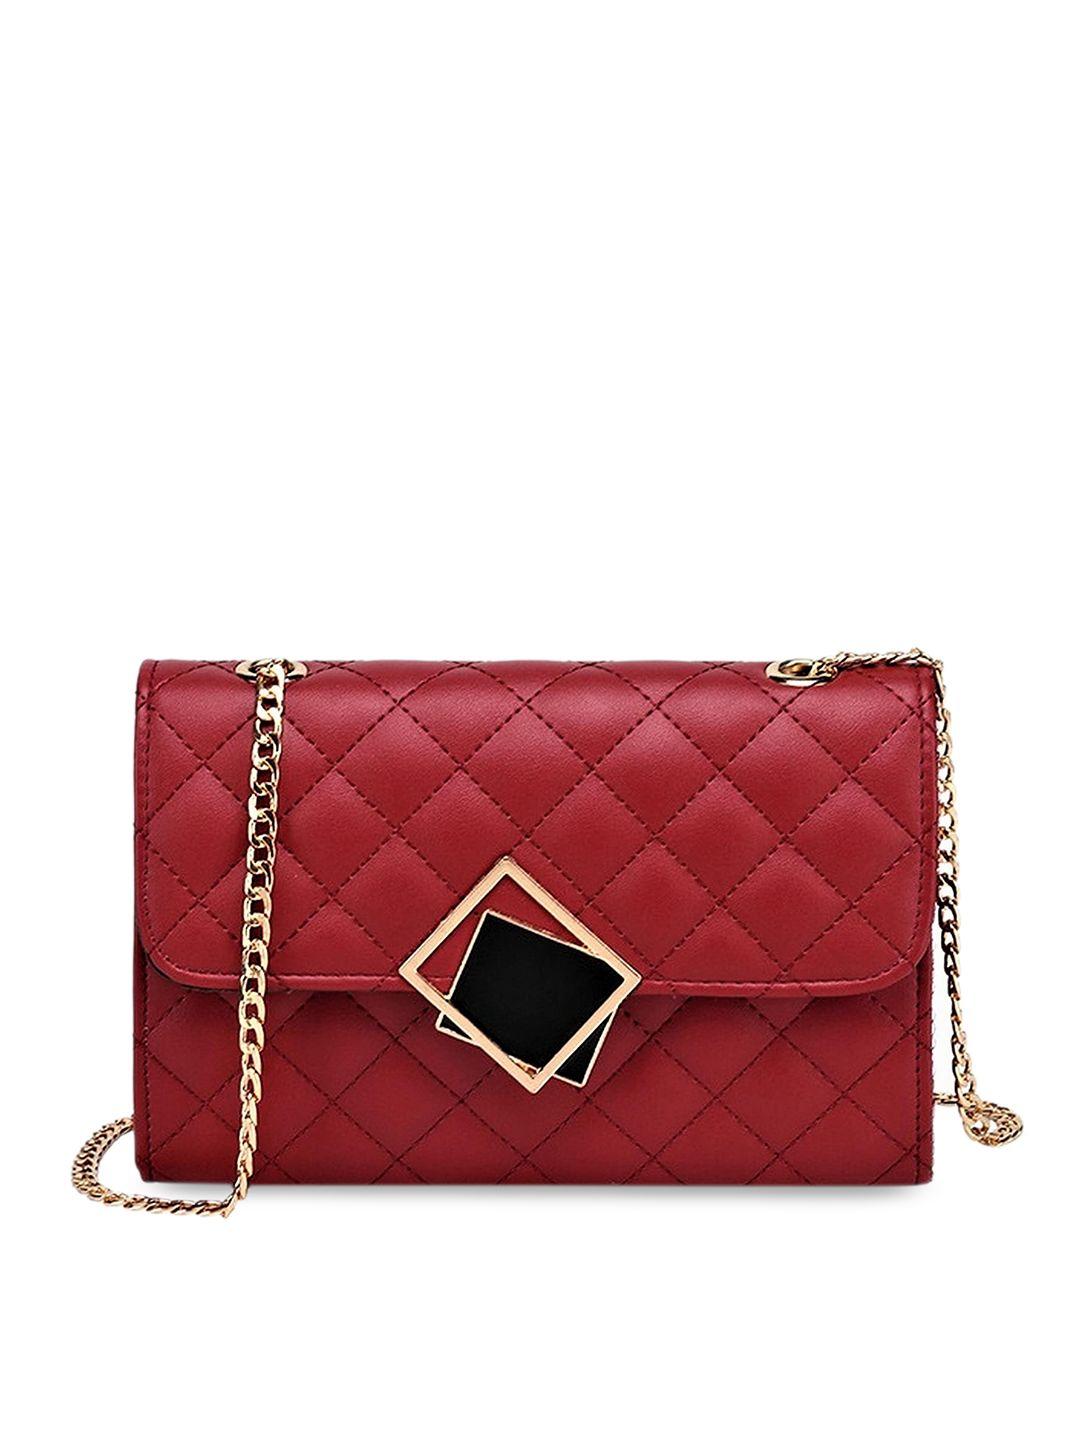 diva dale red textured pu structured sling bag